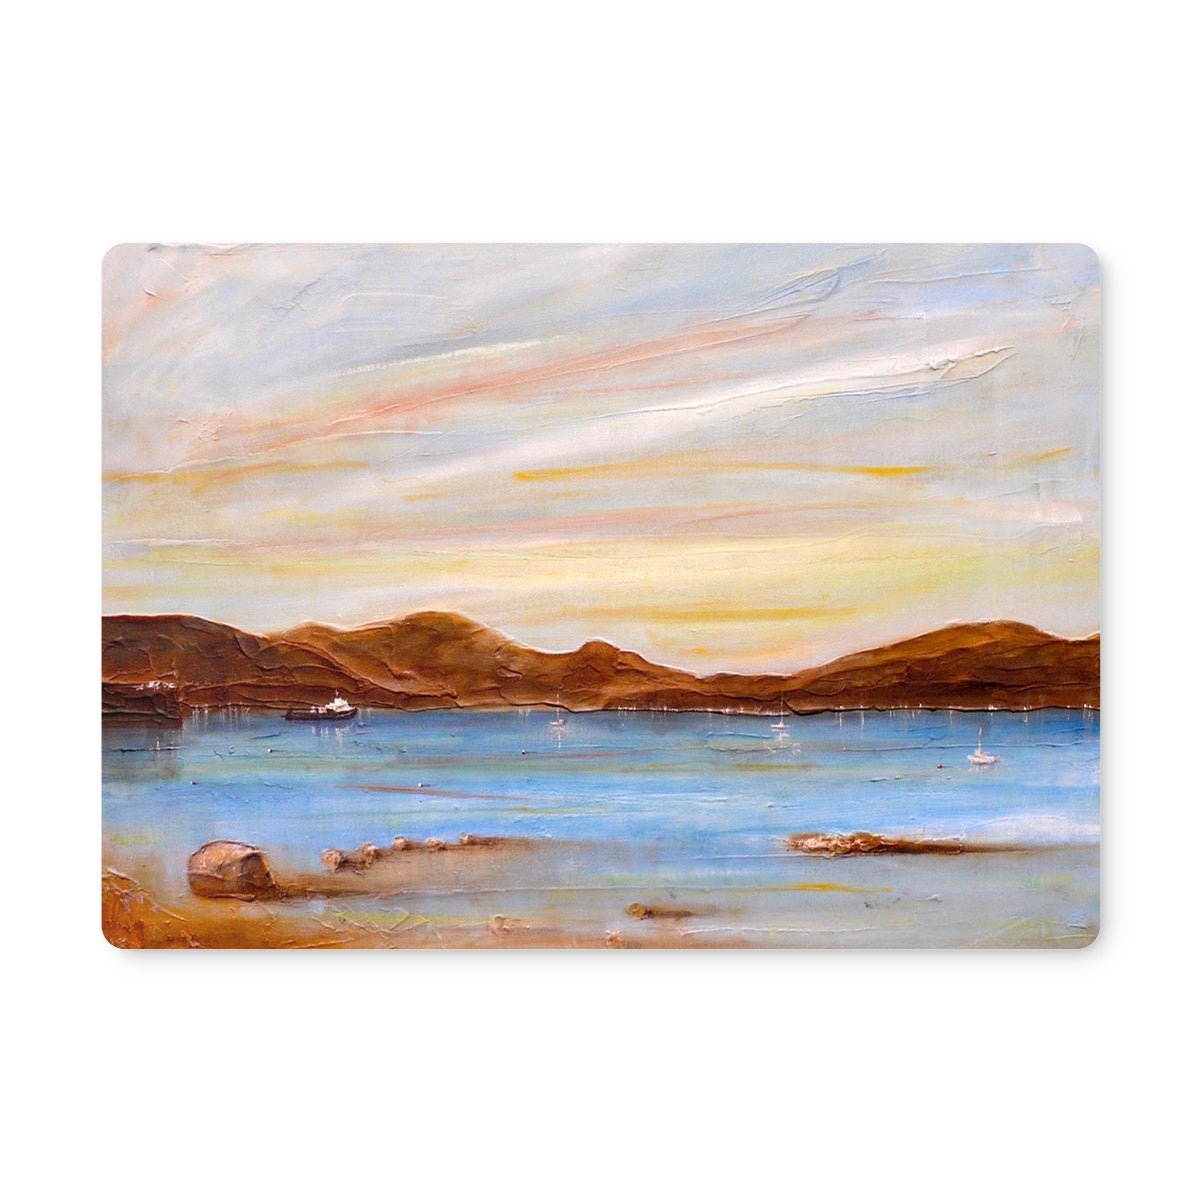 The Last Ferry To Dunoon Art Gifts Placemat-Placemats-River Clyde Art Gallery-Single Placemat-Paintings, Prints, Homeware, Art Gifts From Scotland By Scottish Artist Kevin Hunter